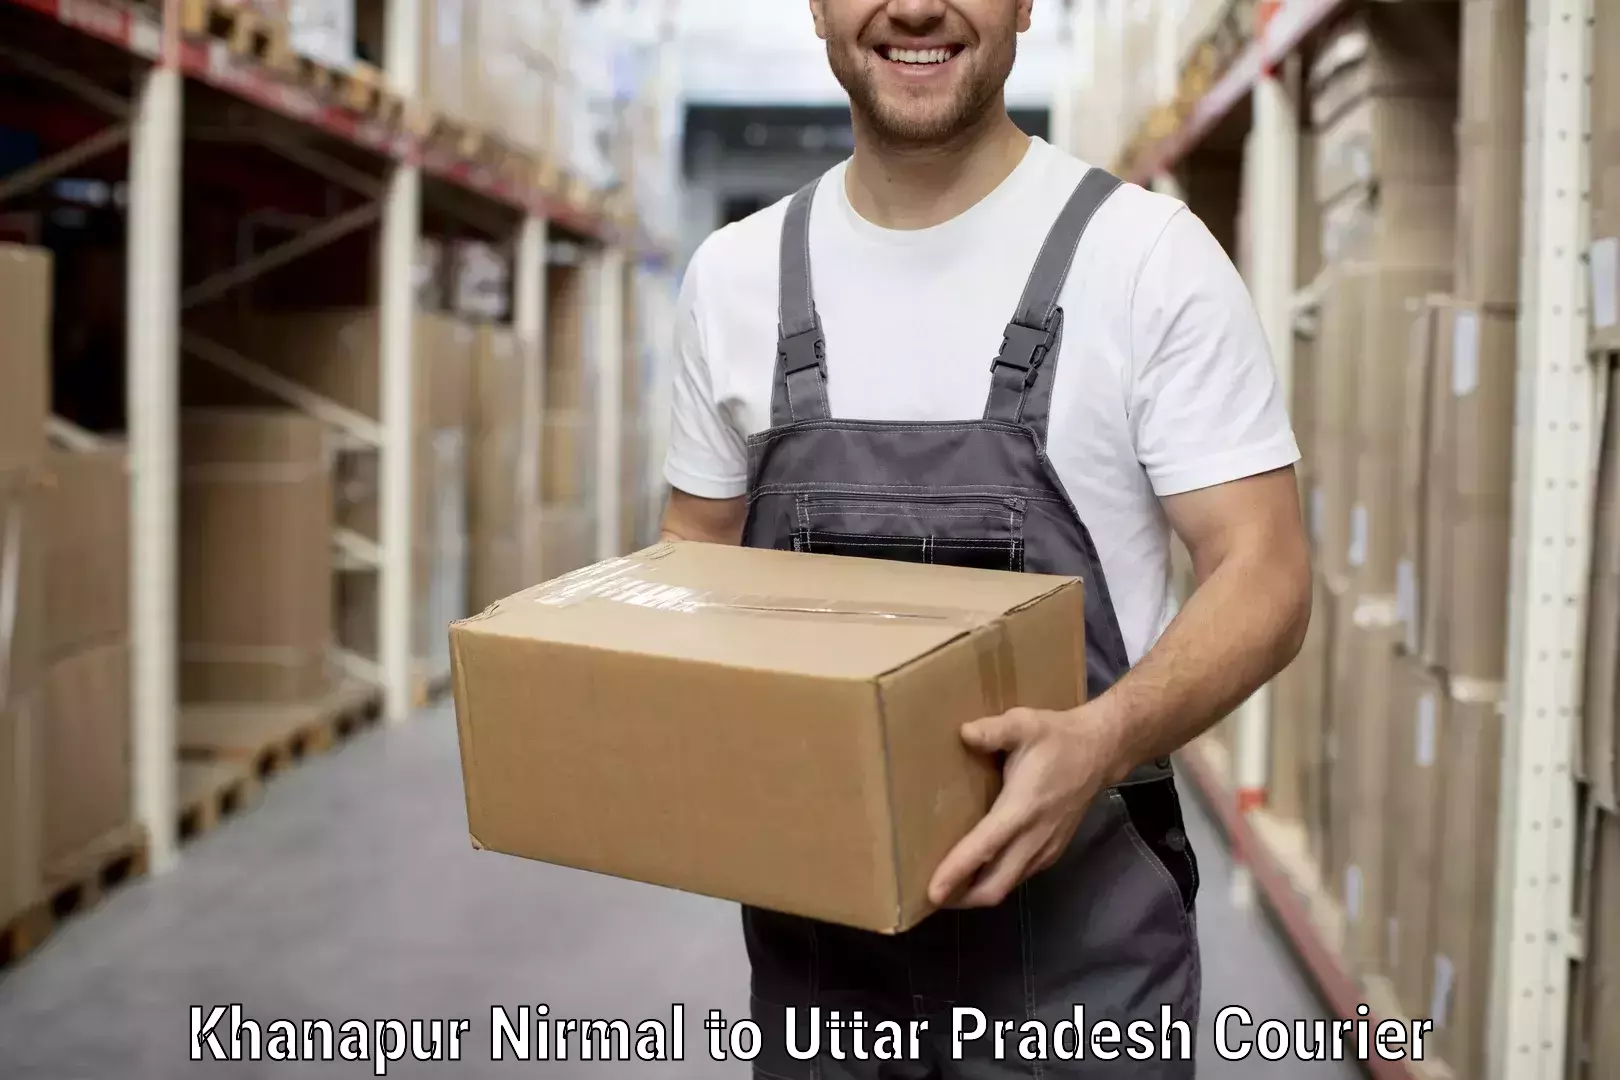 Moving and packing experts Khanapur Nirmal to Sirathu